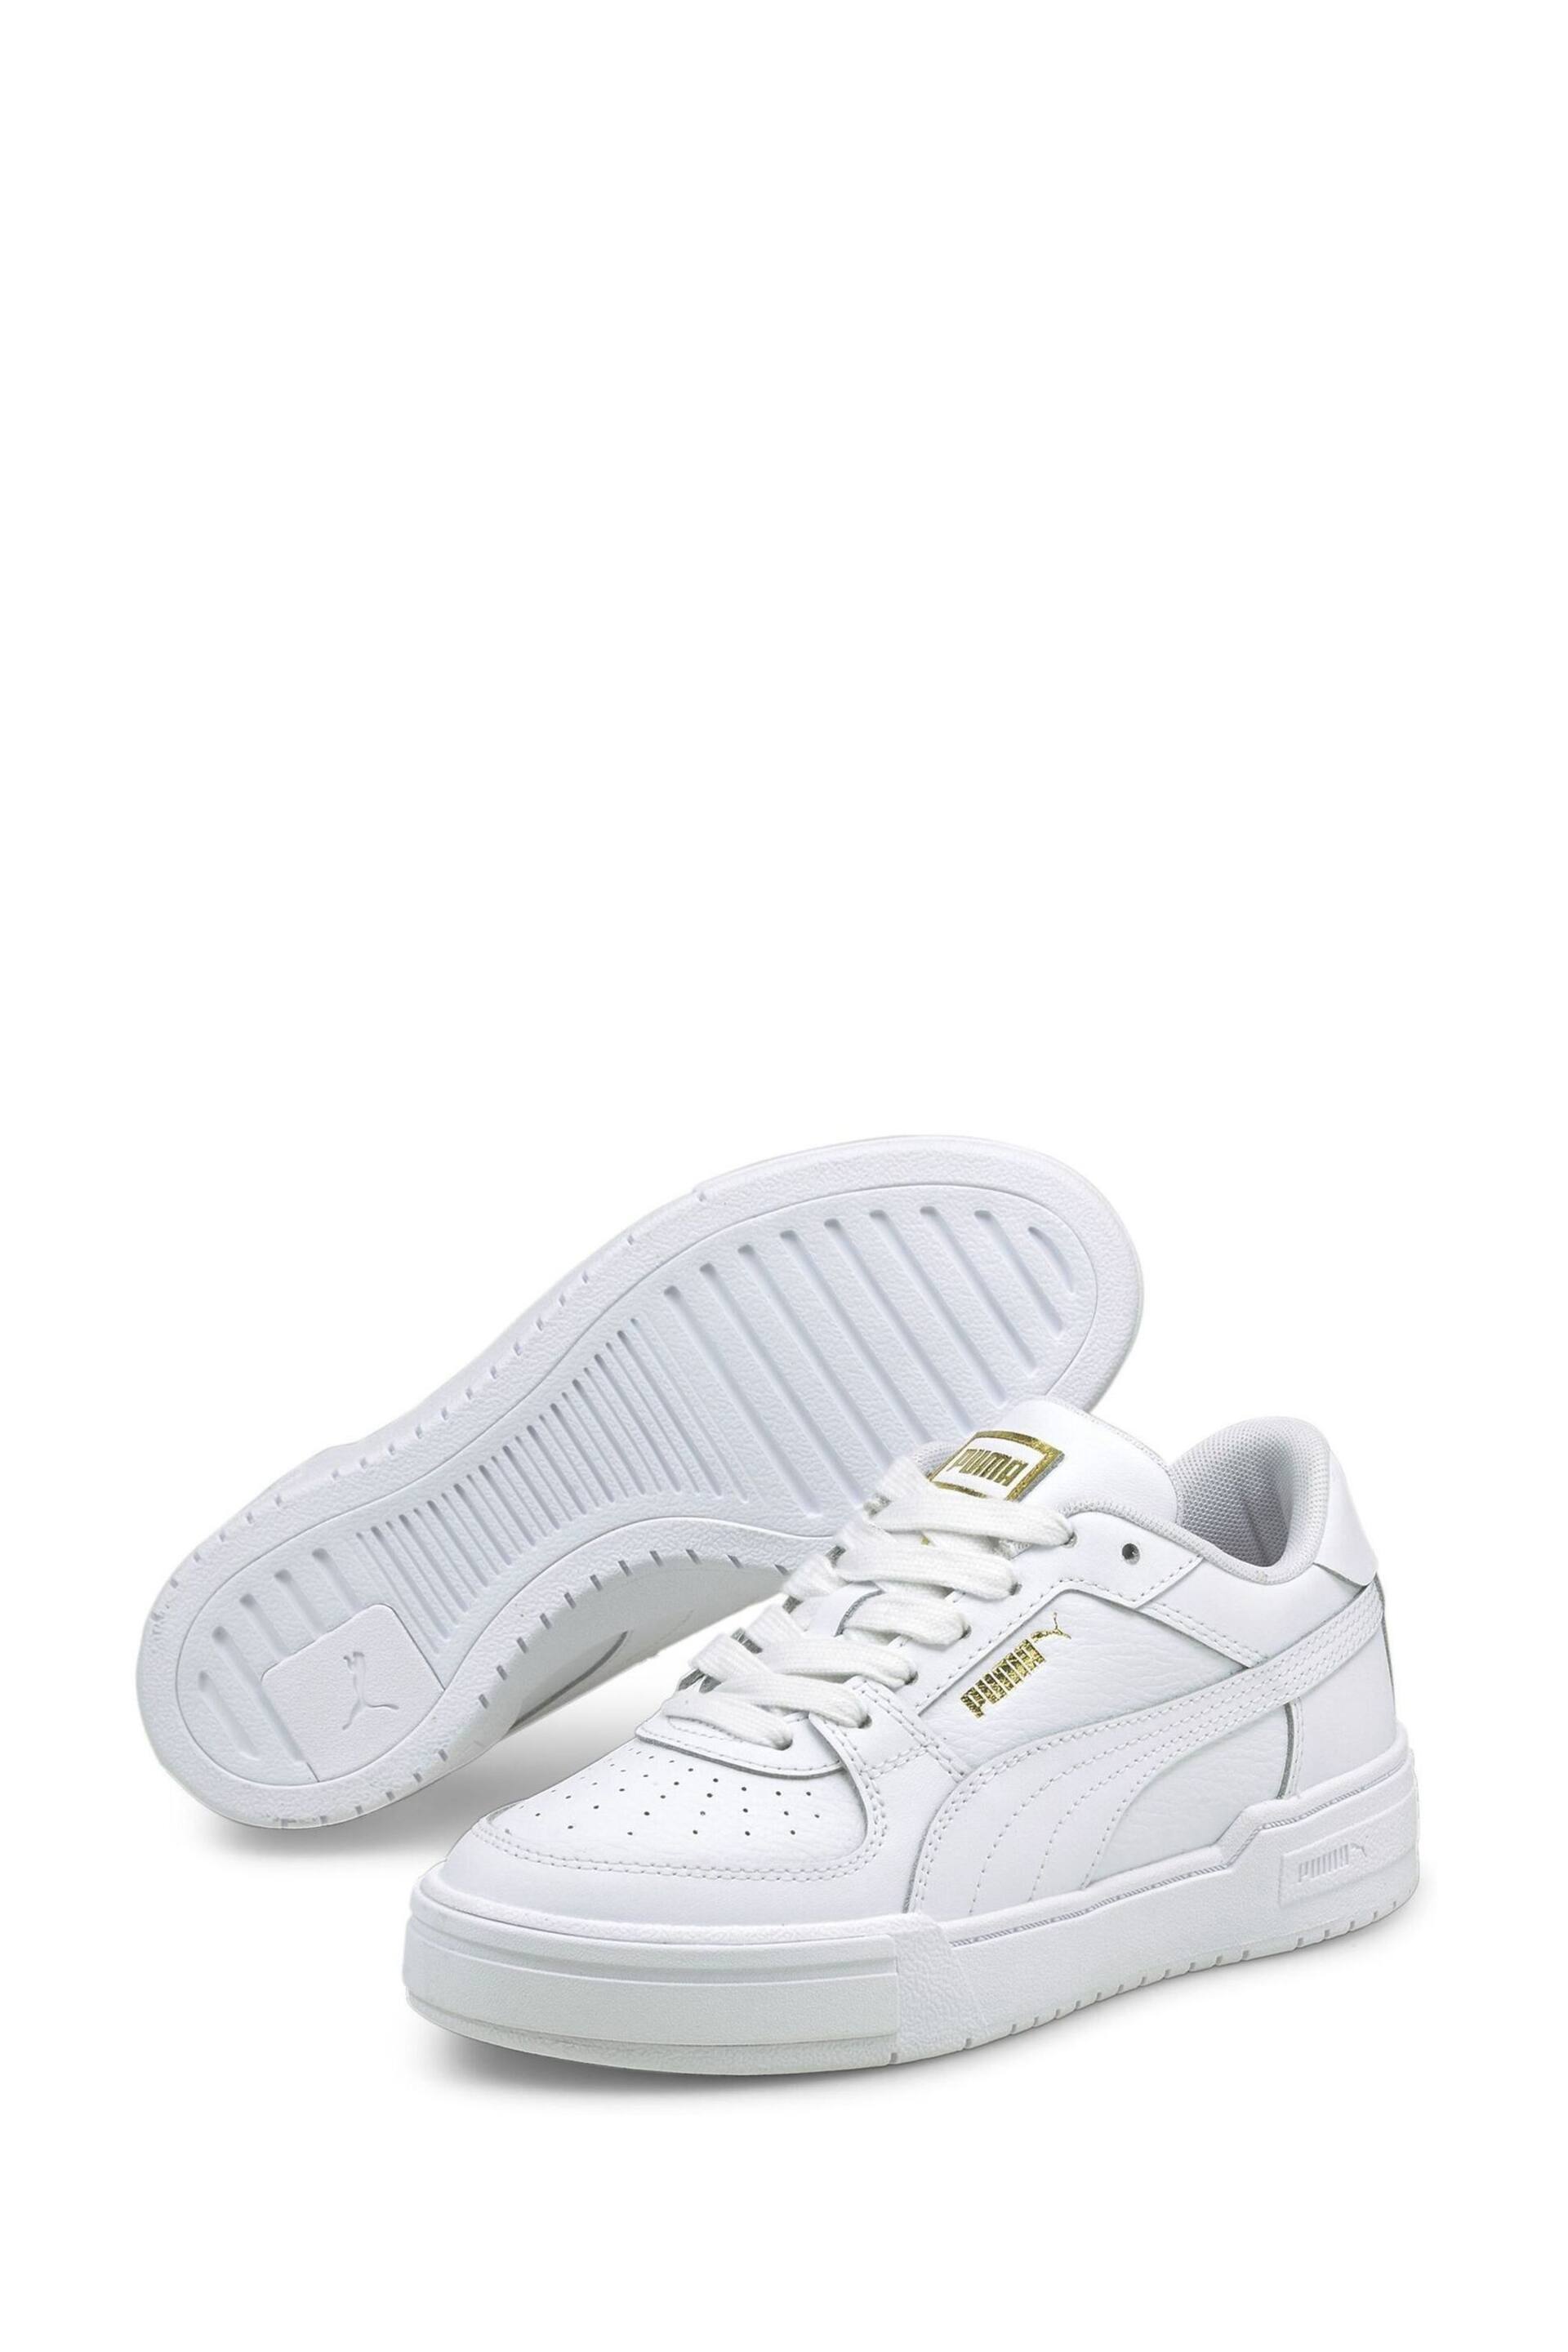 Puma White CA Pro Classic Youth Trainers - Image 3 of 6